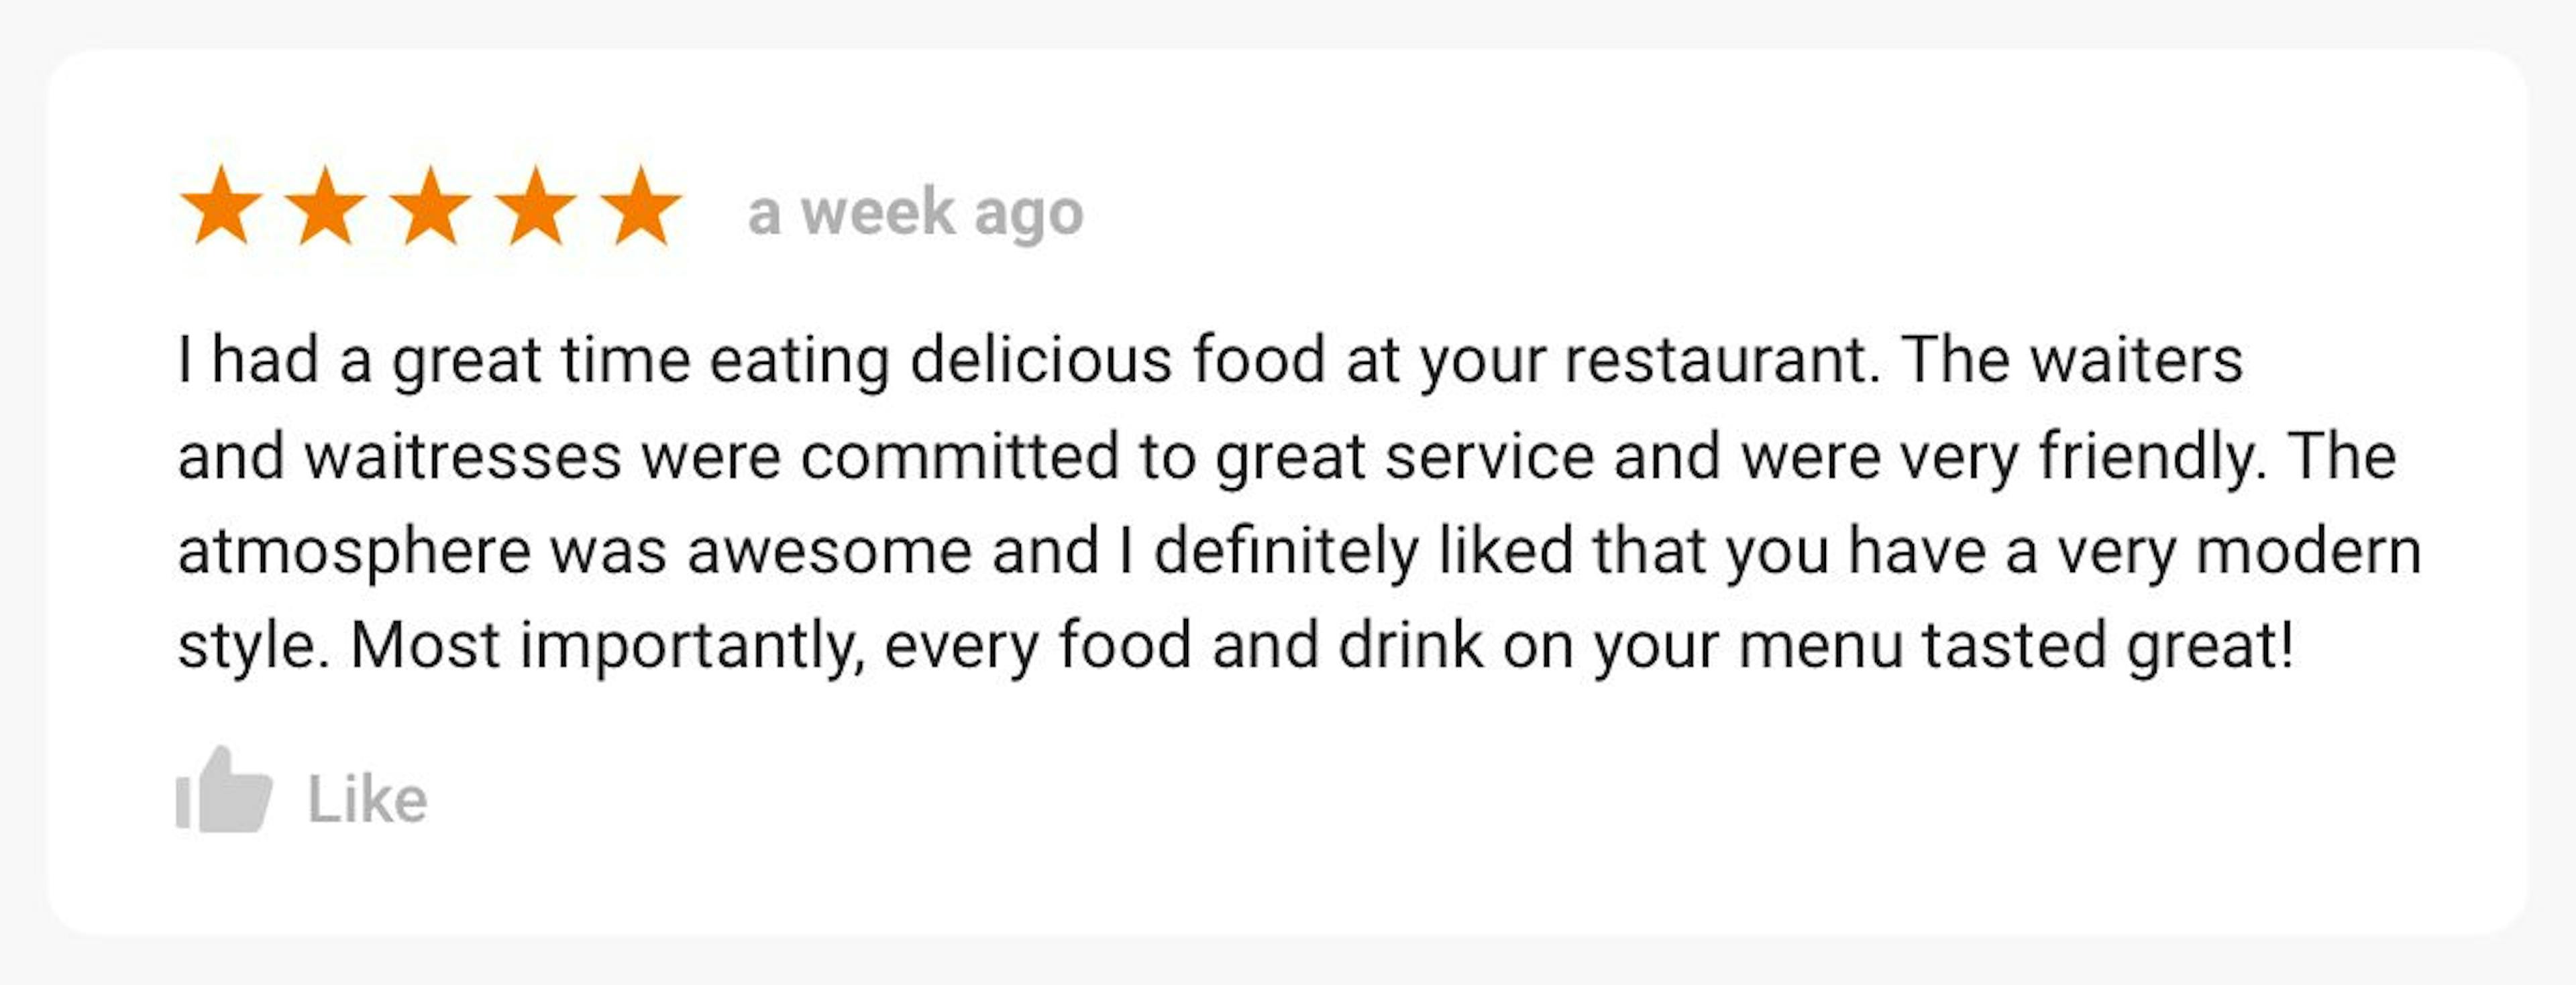 Review on Food Service